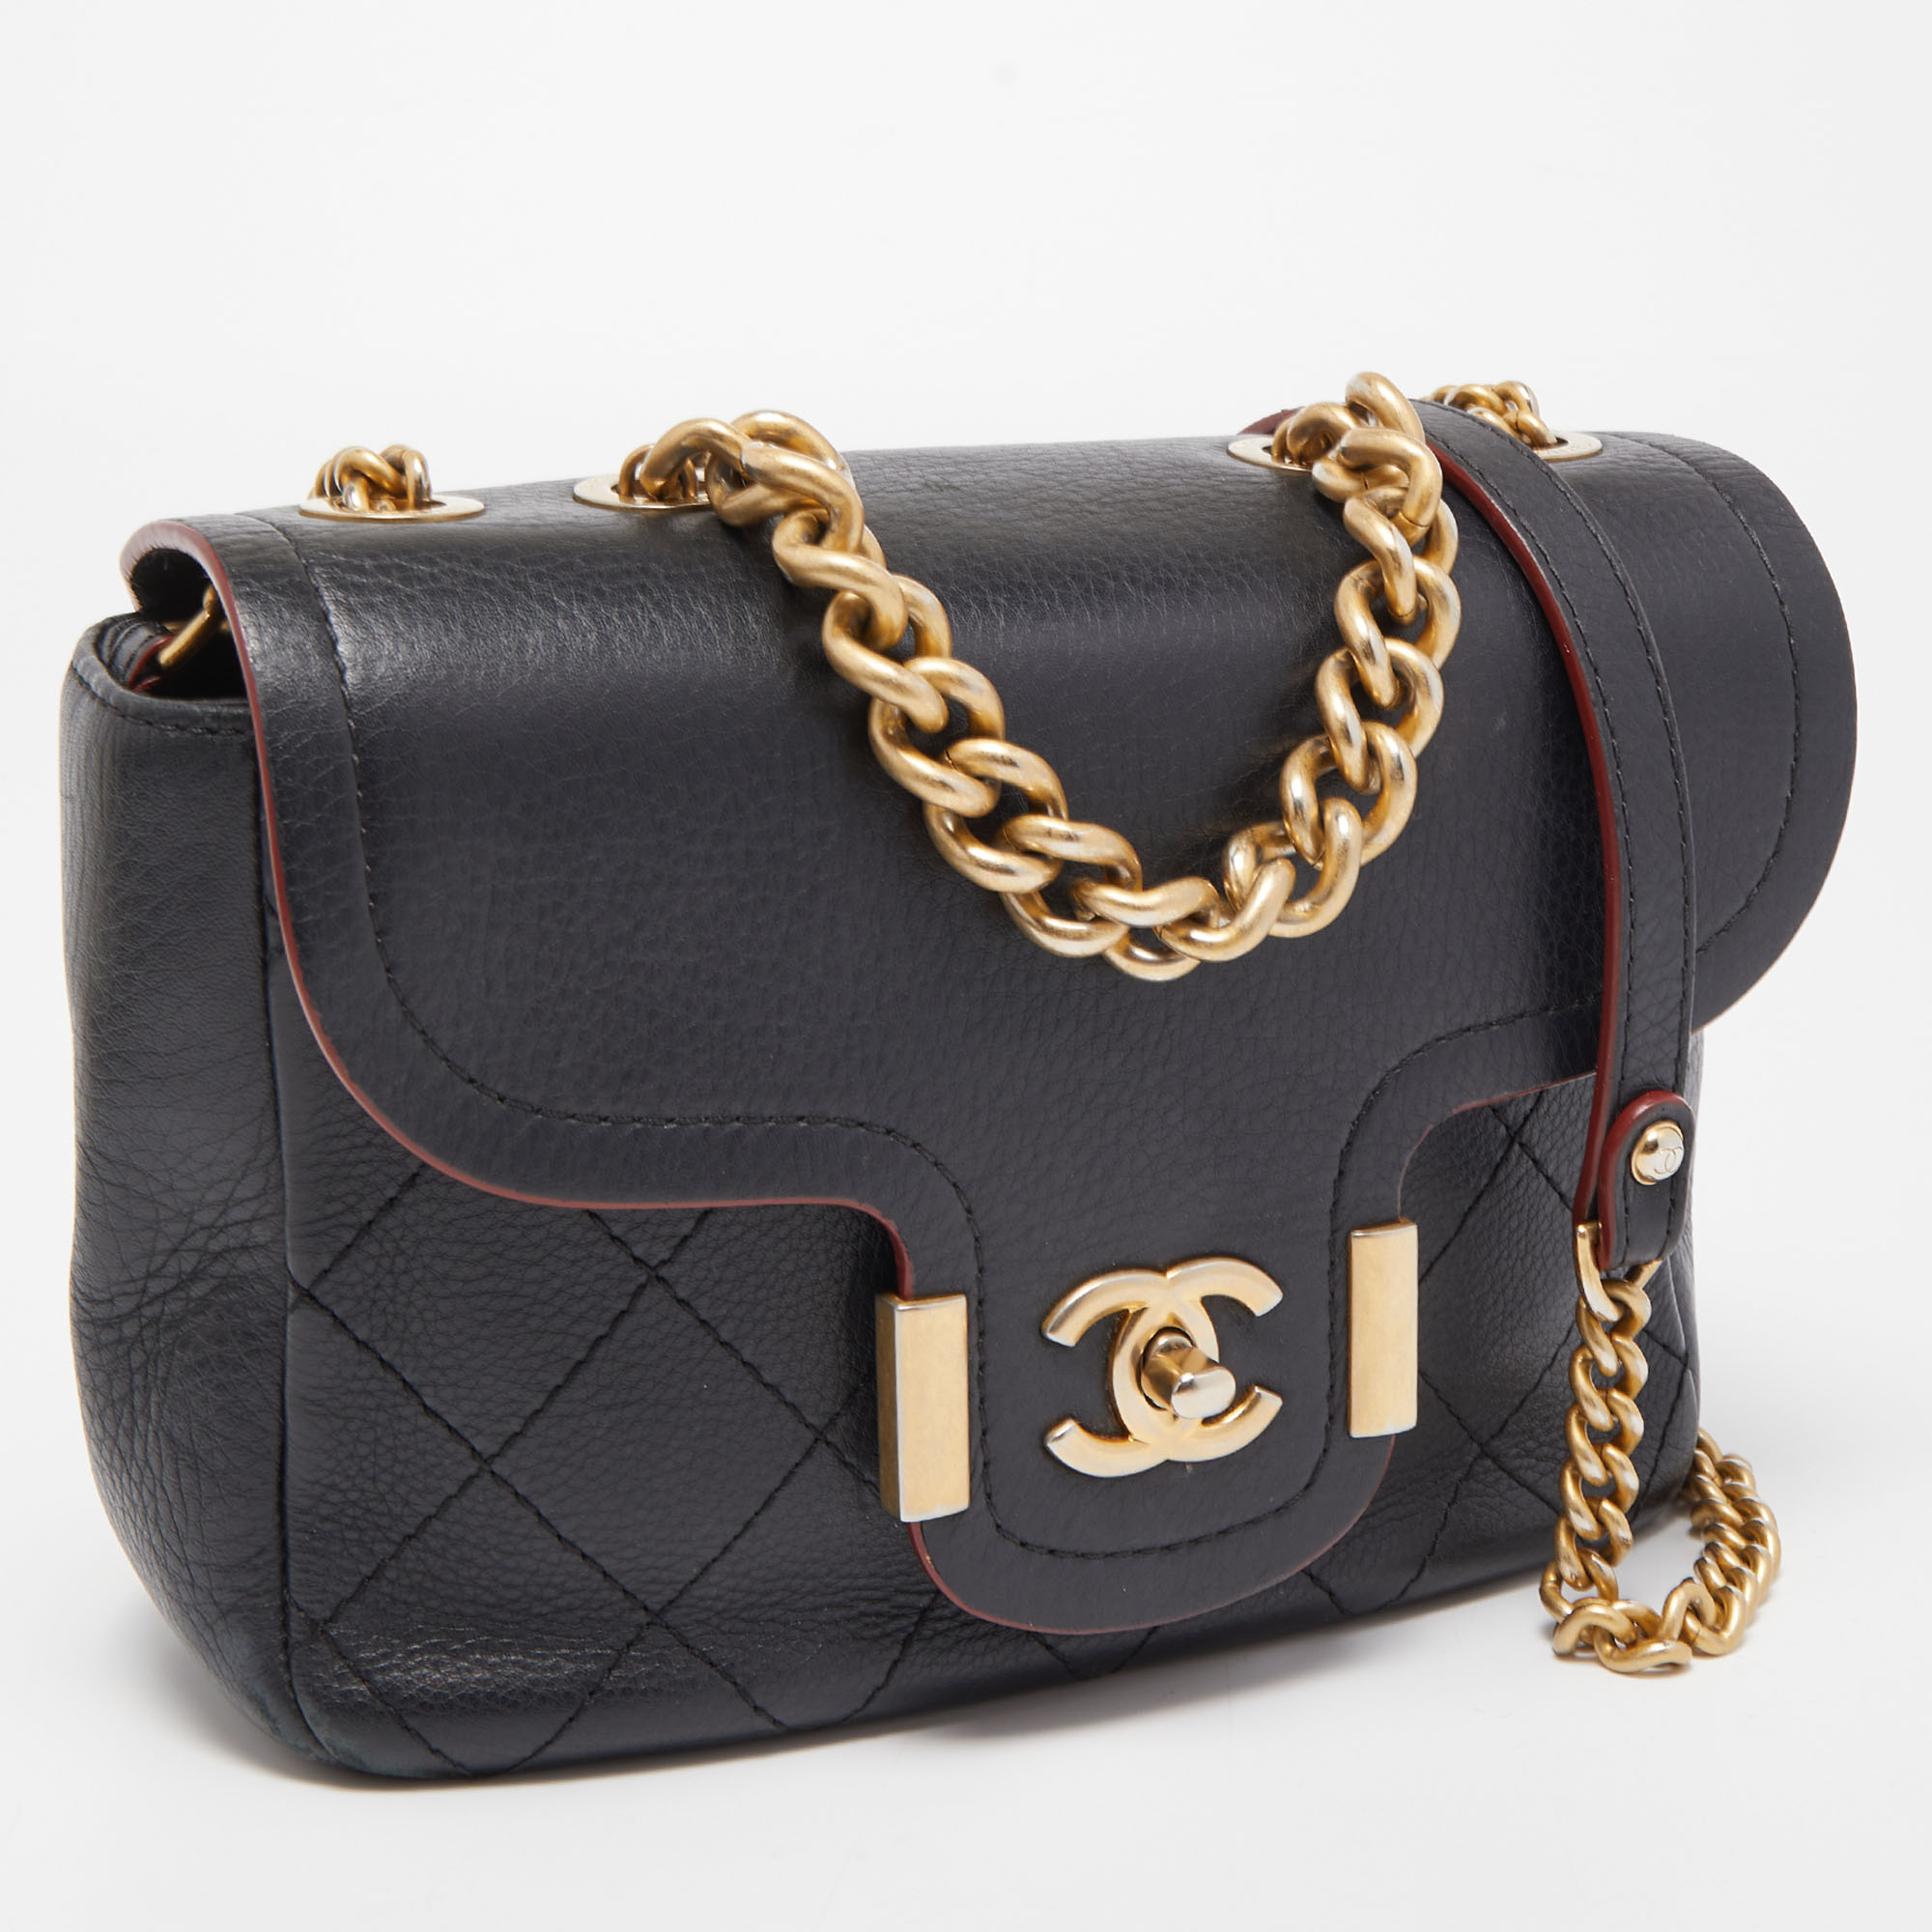 Chanel Black Quilted Leather Archi Chic Flap Bag